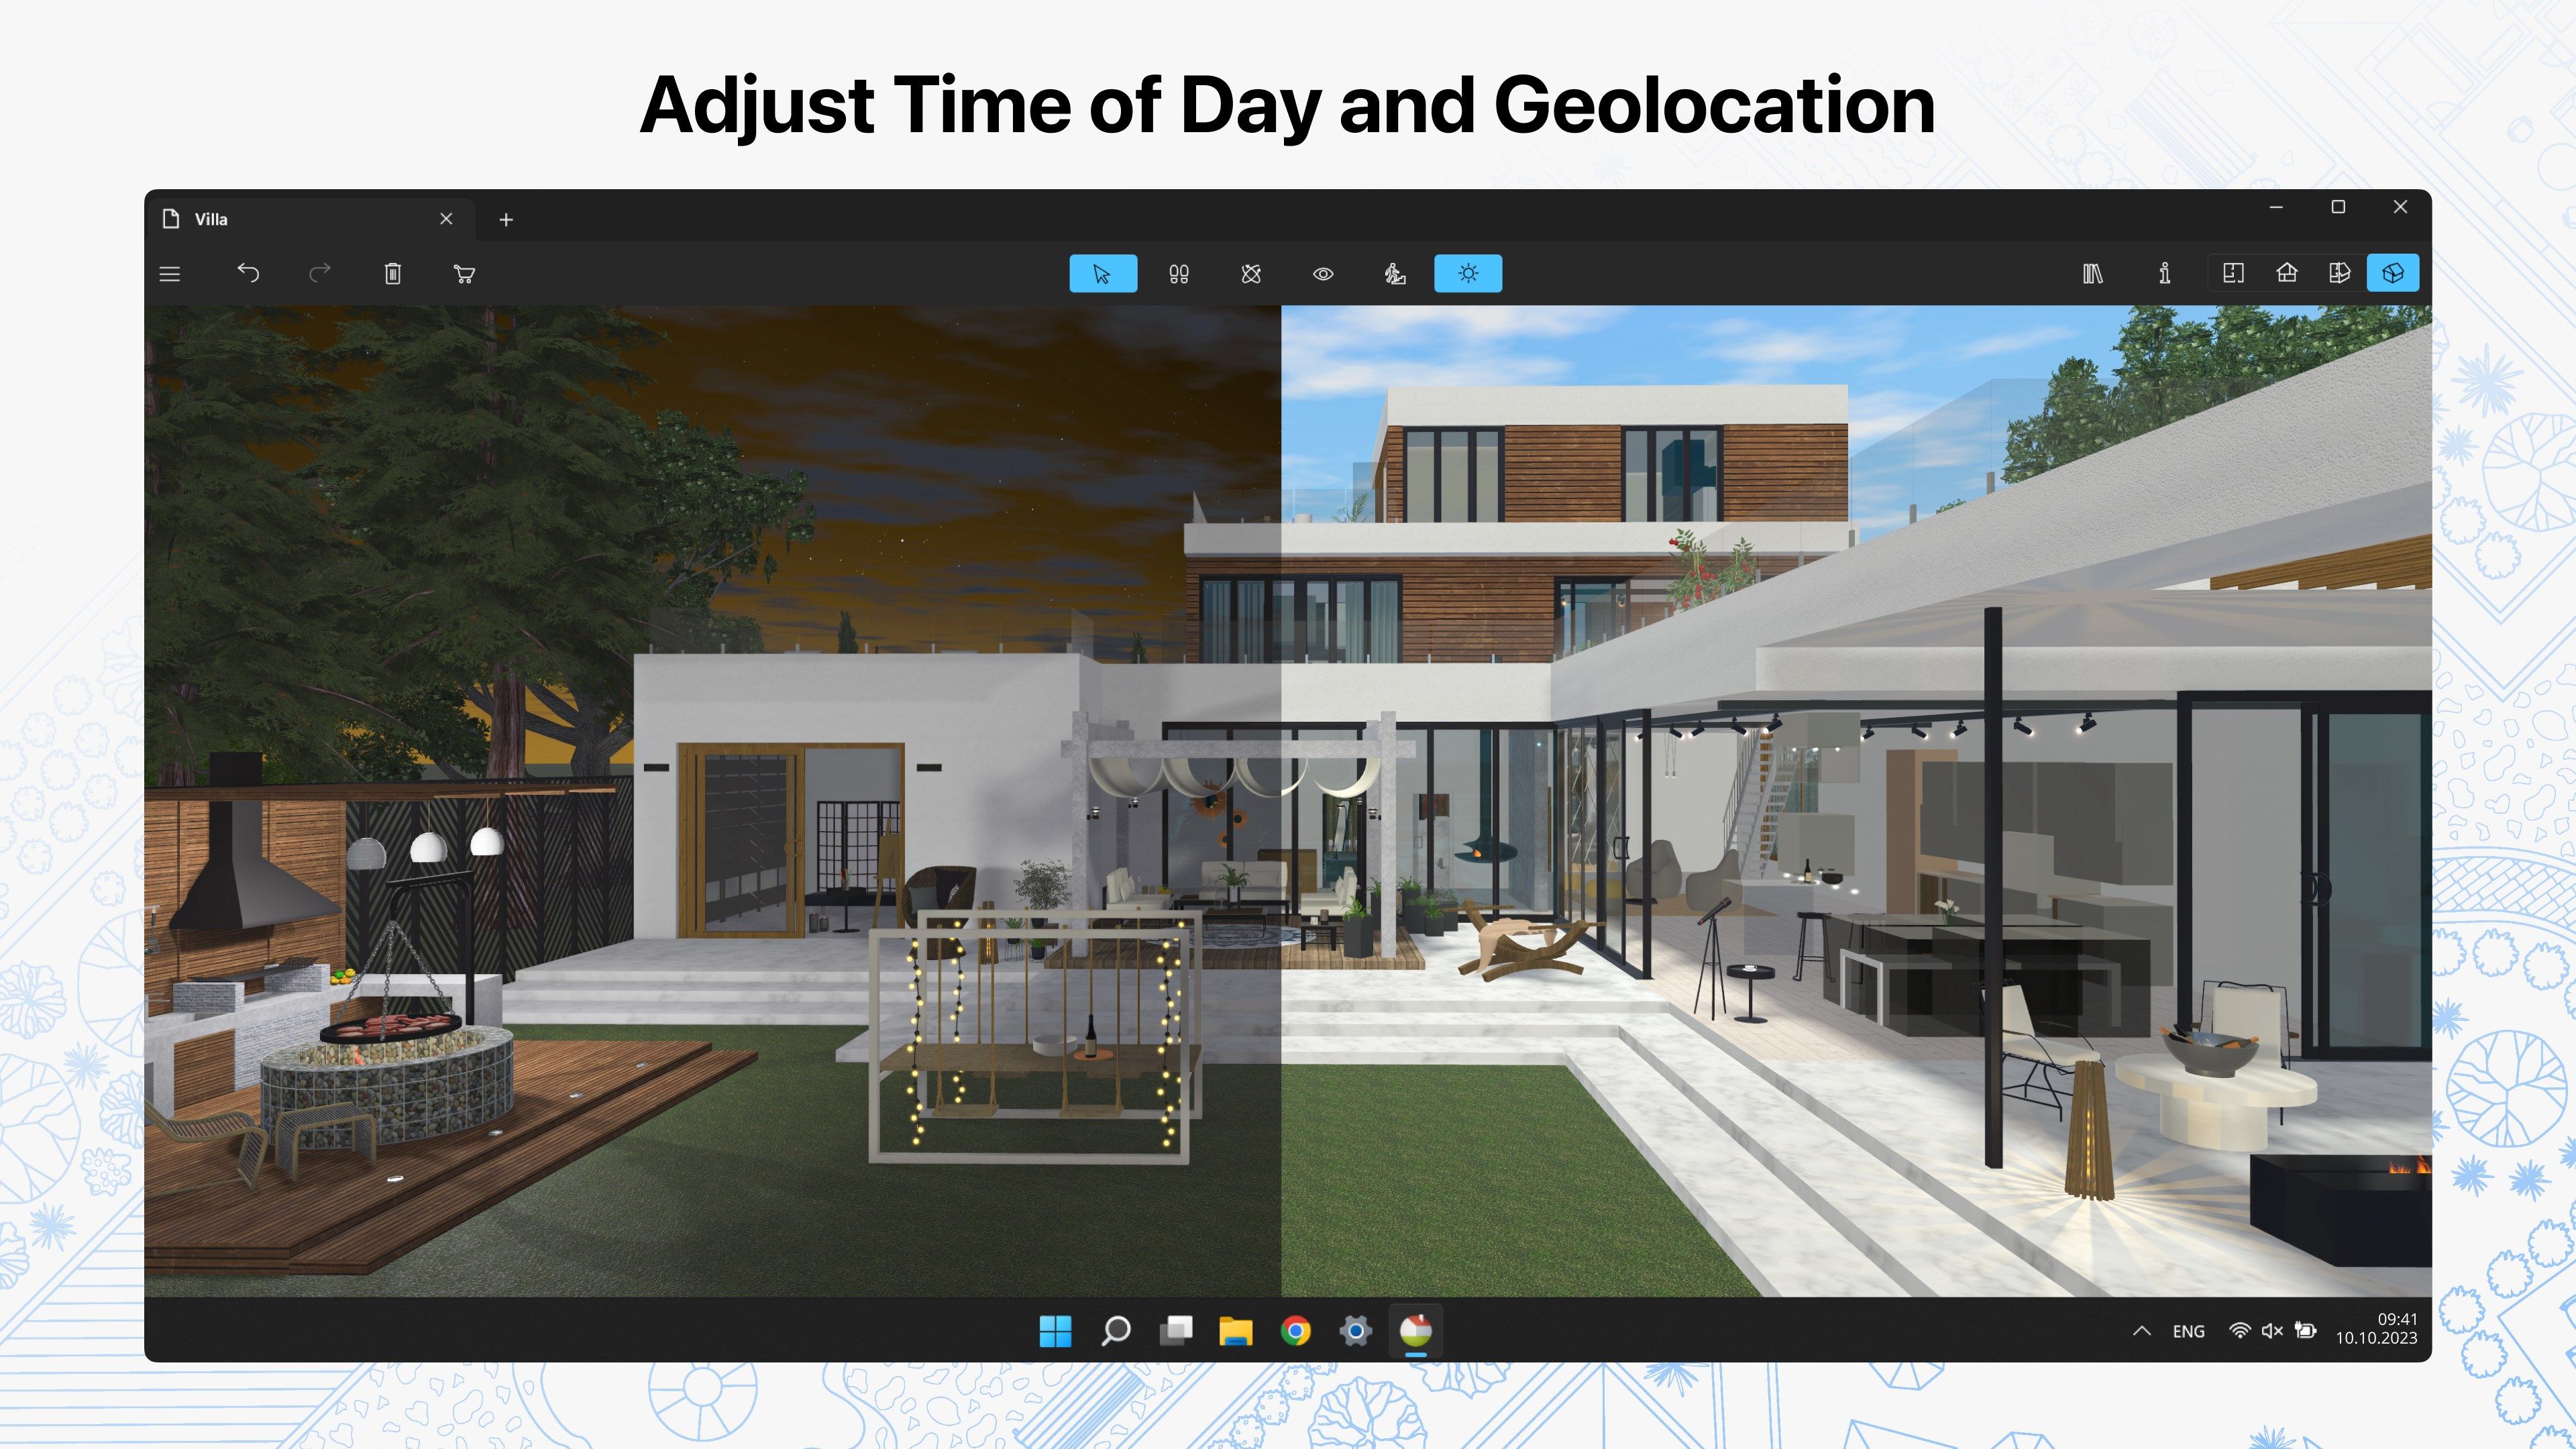 Adjust Time of Day and Geolocation